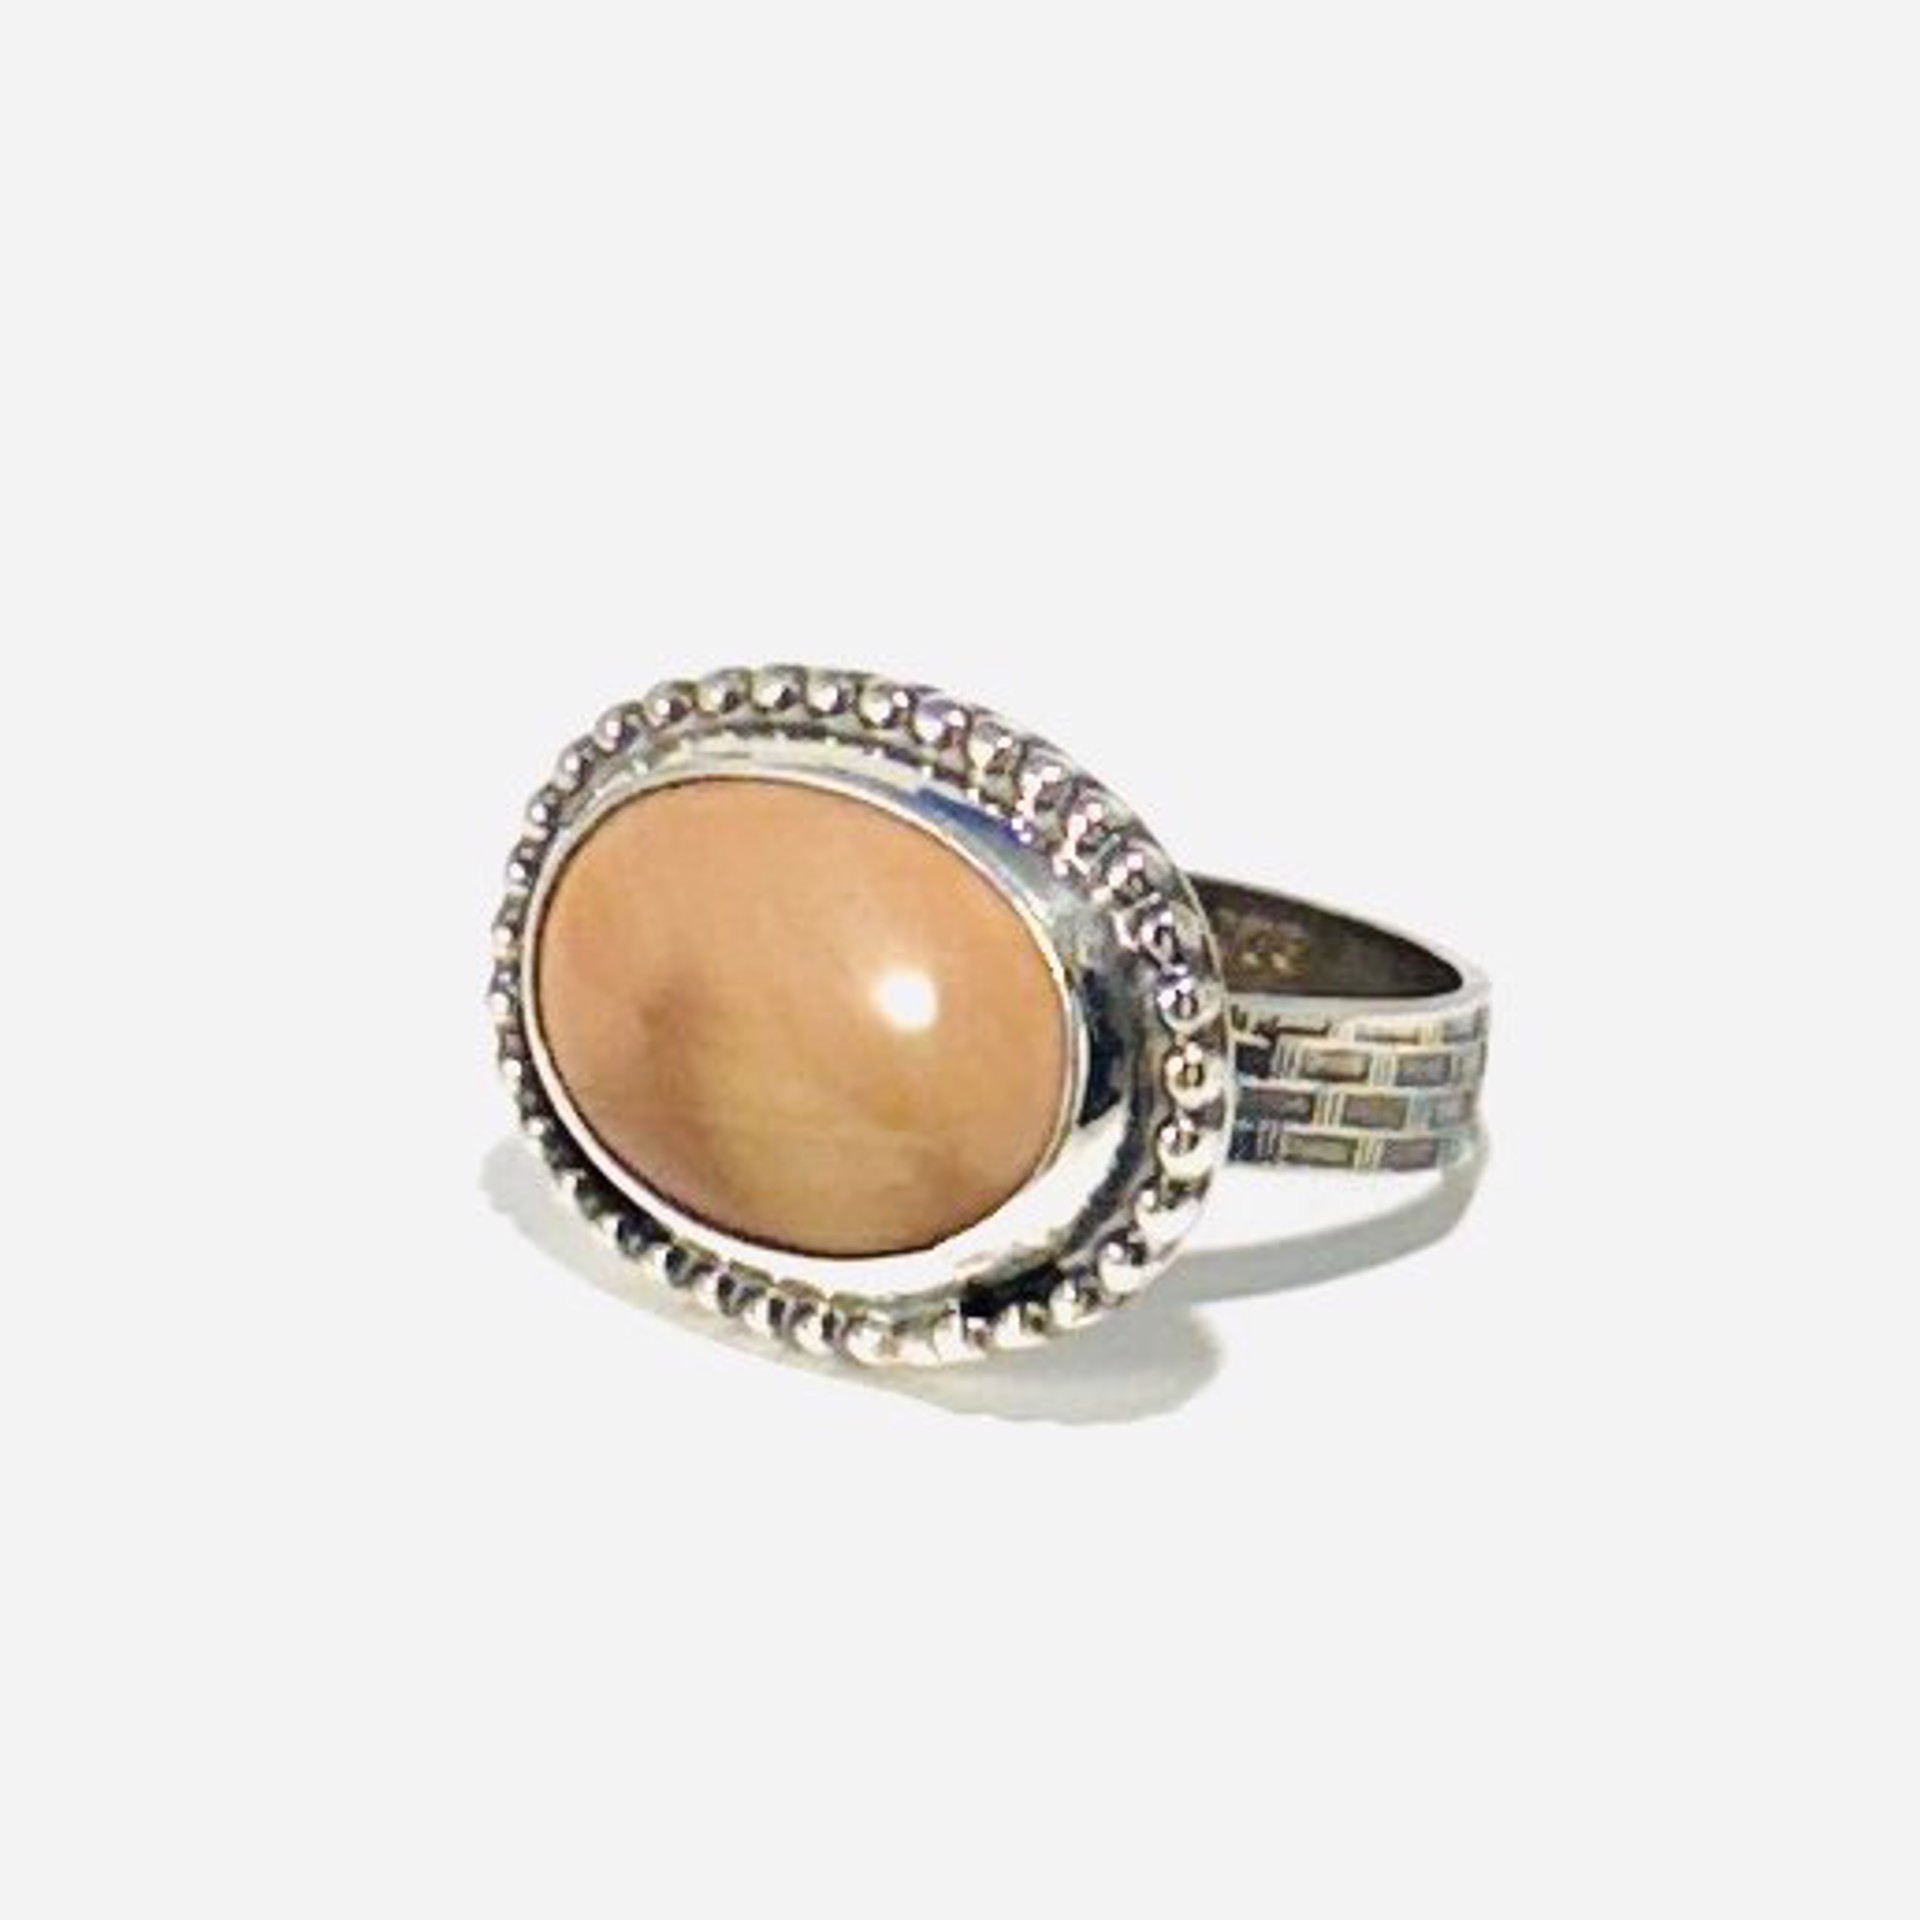 Imperial Jasper Ring sz7 AB23-68 by Anne Bivens